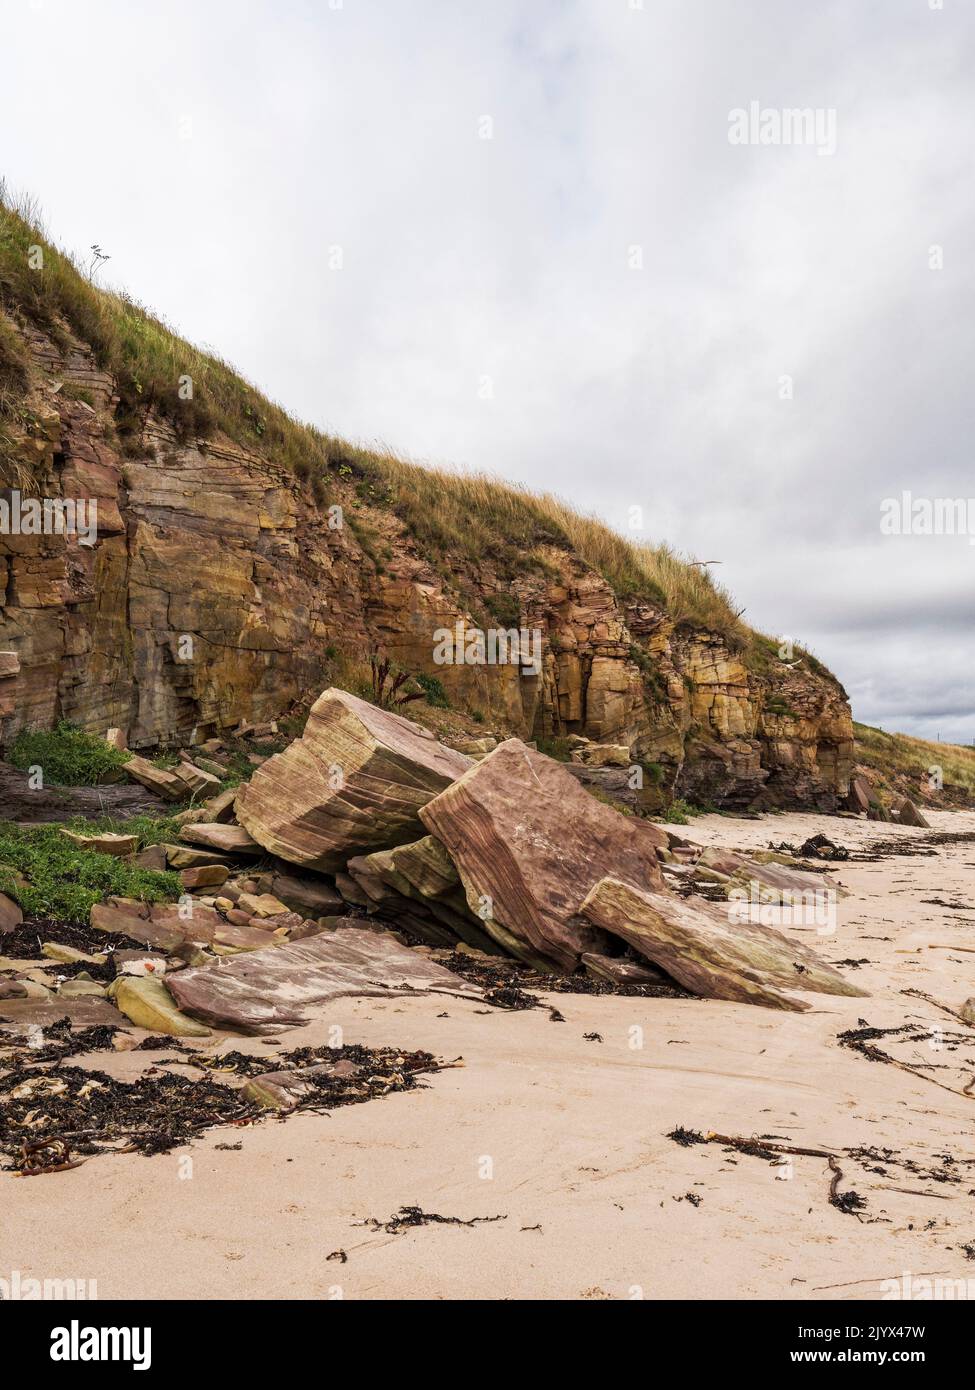 Coastal erosion illustrated by fallen sandstone cliffs at Cresswell beach in Northumberland, UK Stock Photo